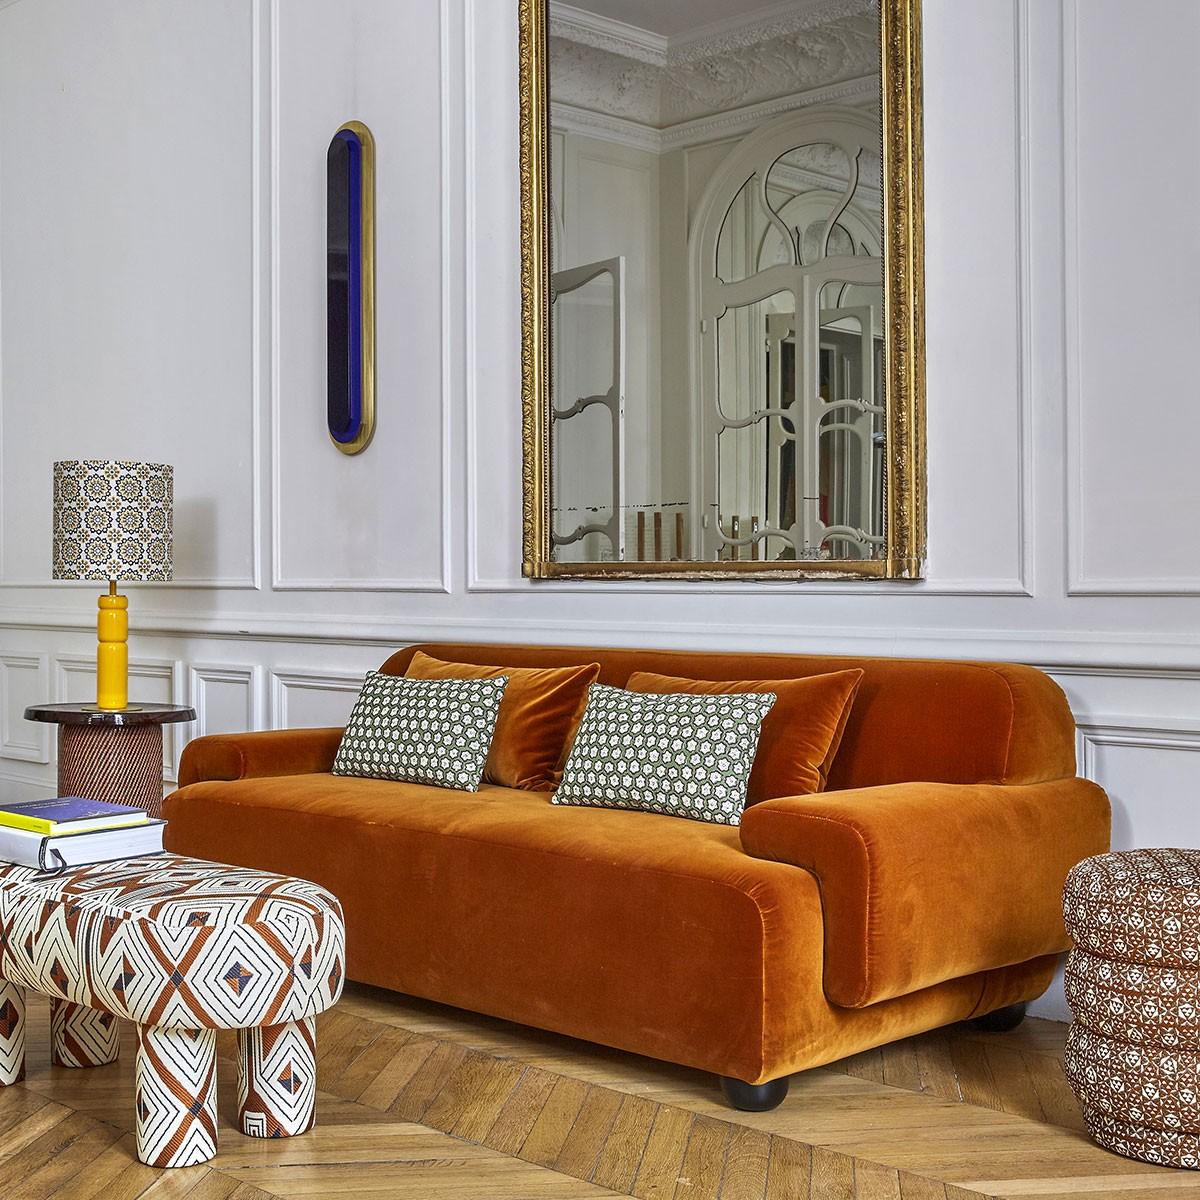 Popus Editions Lena 2.5 seater sofa in Mole Como Velvet Upholstery

It looks like it's straight out of a movie, with its generous curves and wide armrests. It is a real invitation to spend long Sundays with the family, comfortably seated in front